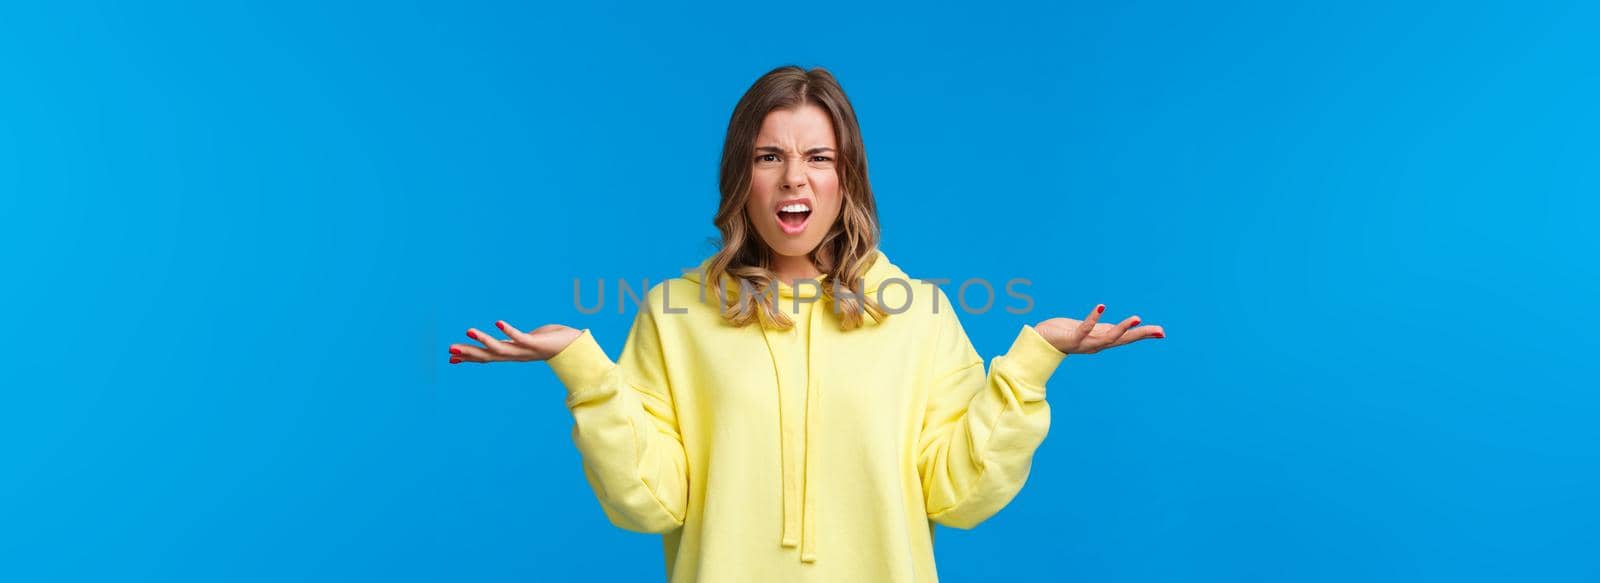 What problem wtf. Pissed-off frustrated and angry young blond caucasian girl shrugging with confused annoyed expression, cant understand what happened, dont know anything, blue background.